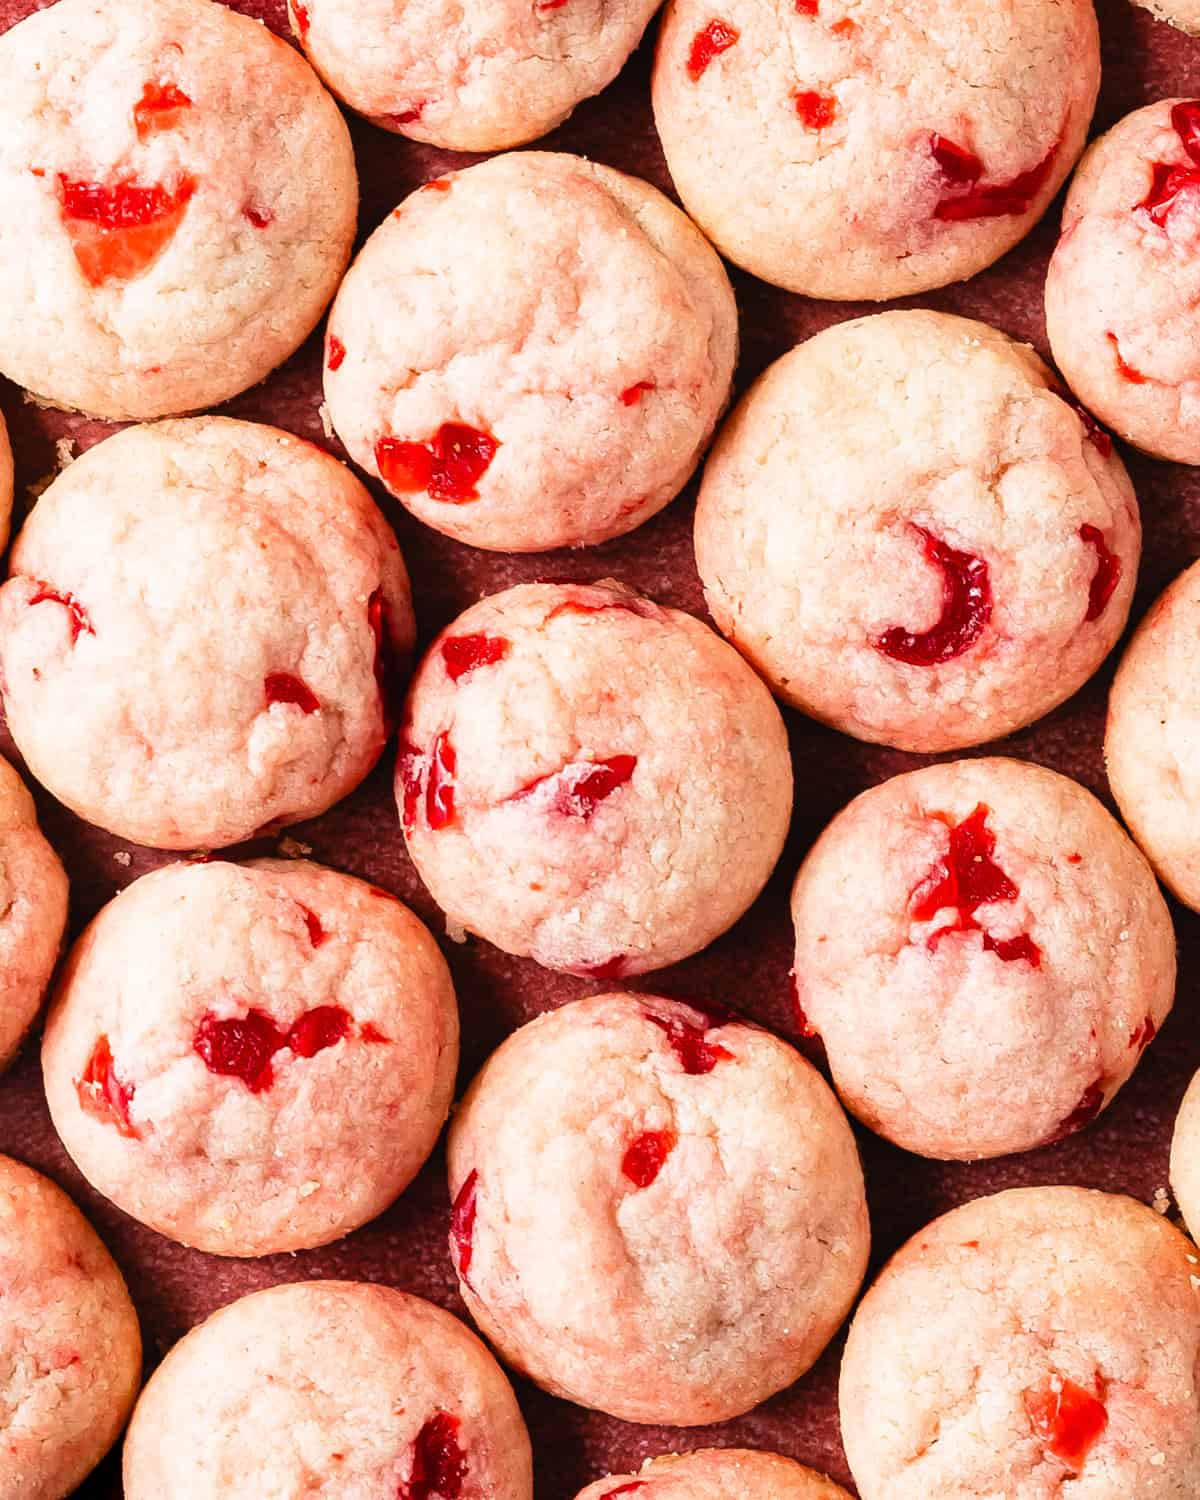 Cherry cookies are soft and buttery shortbread style drop cookies filled with maraschino cherries and sweet almond flavor. These pretty pink maraschino cherry cookies are the perfect quick and easy cherry sugar cookie recipe for any occasion. 